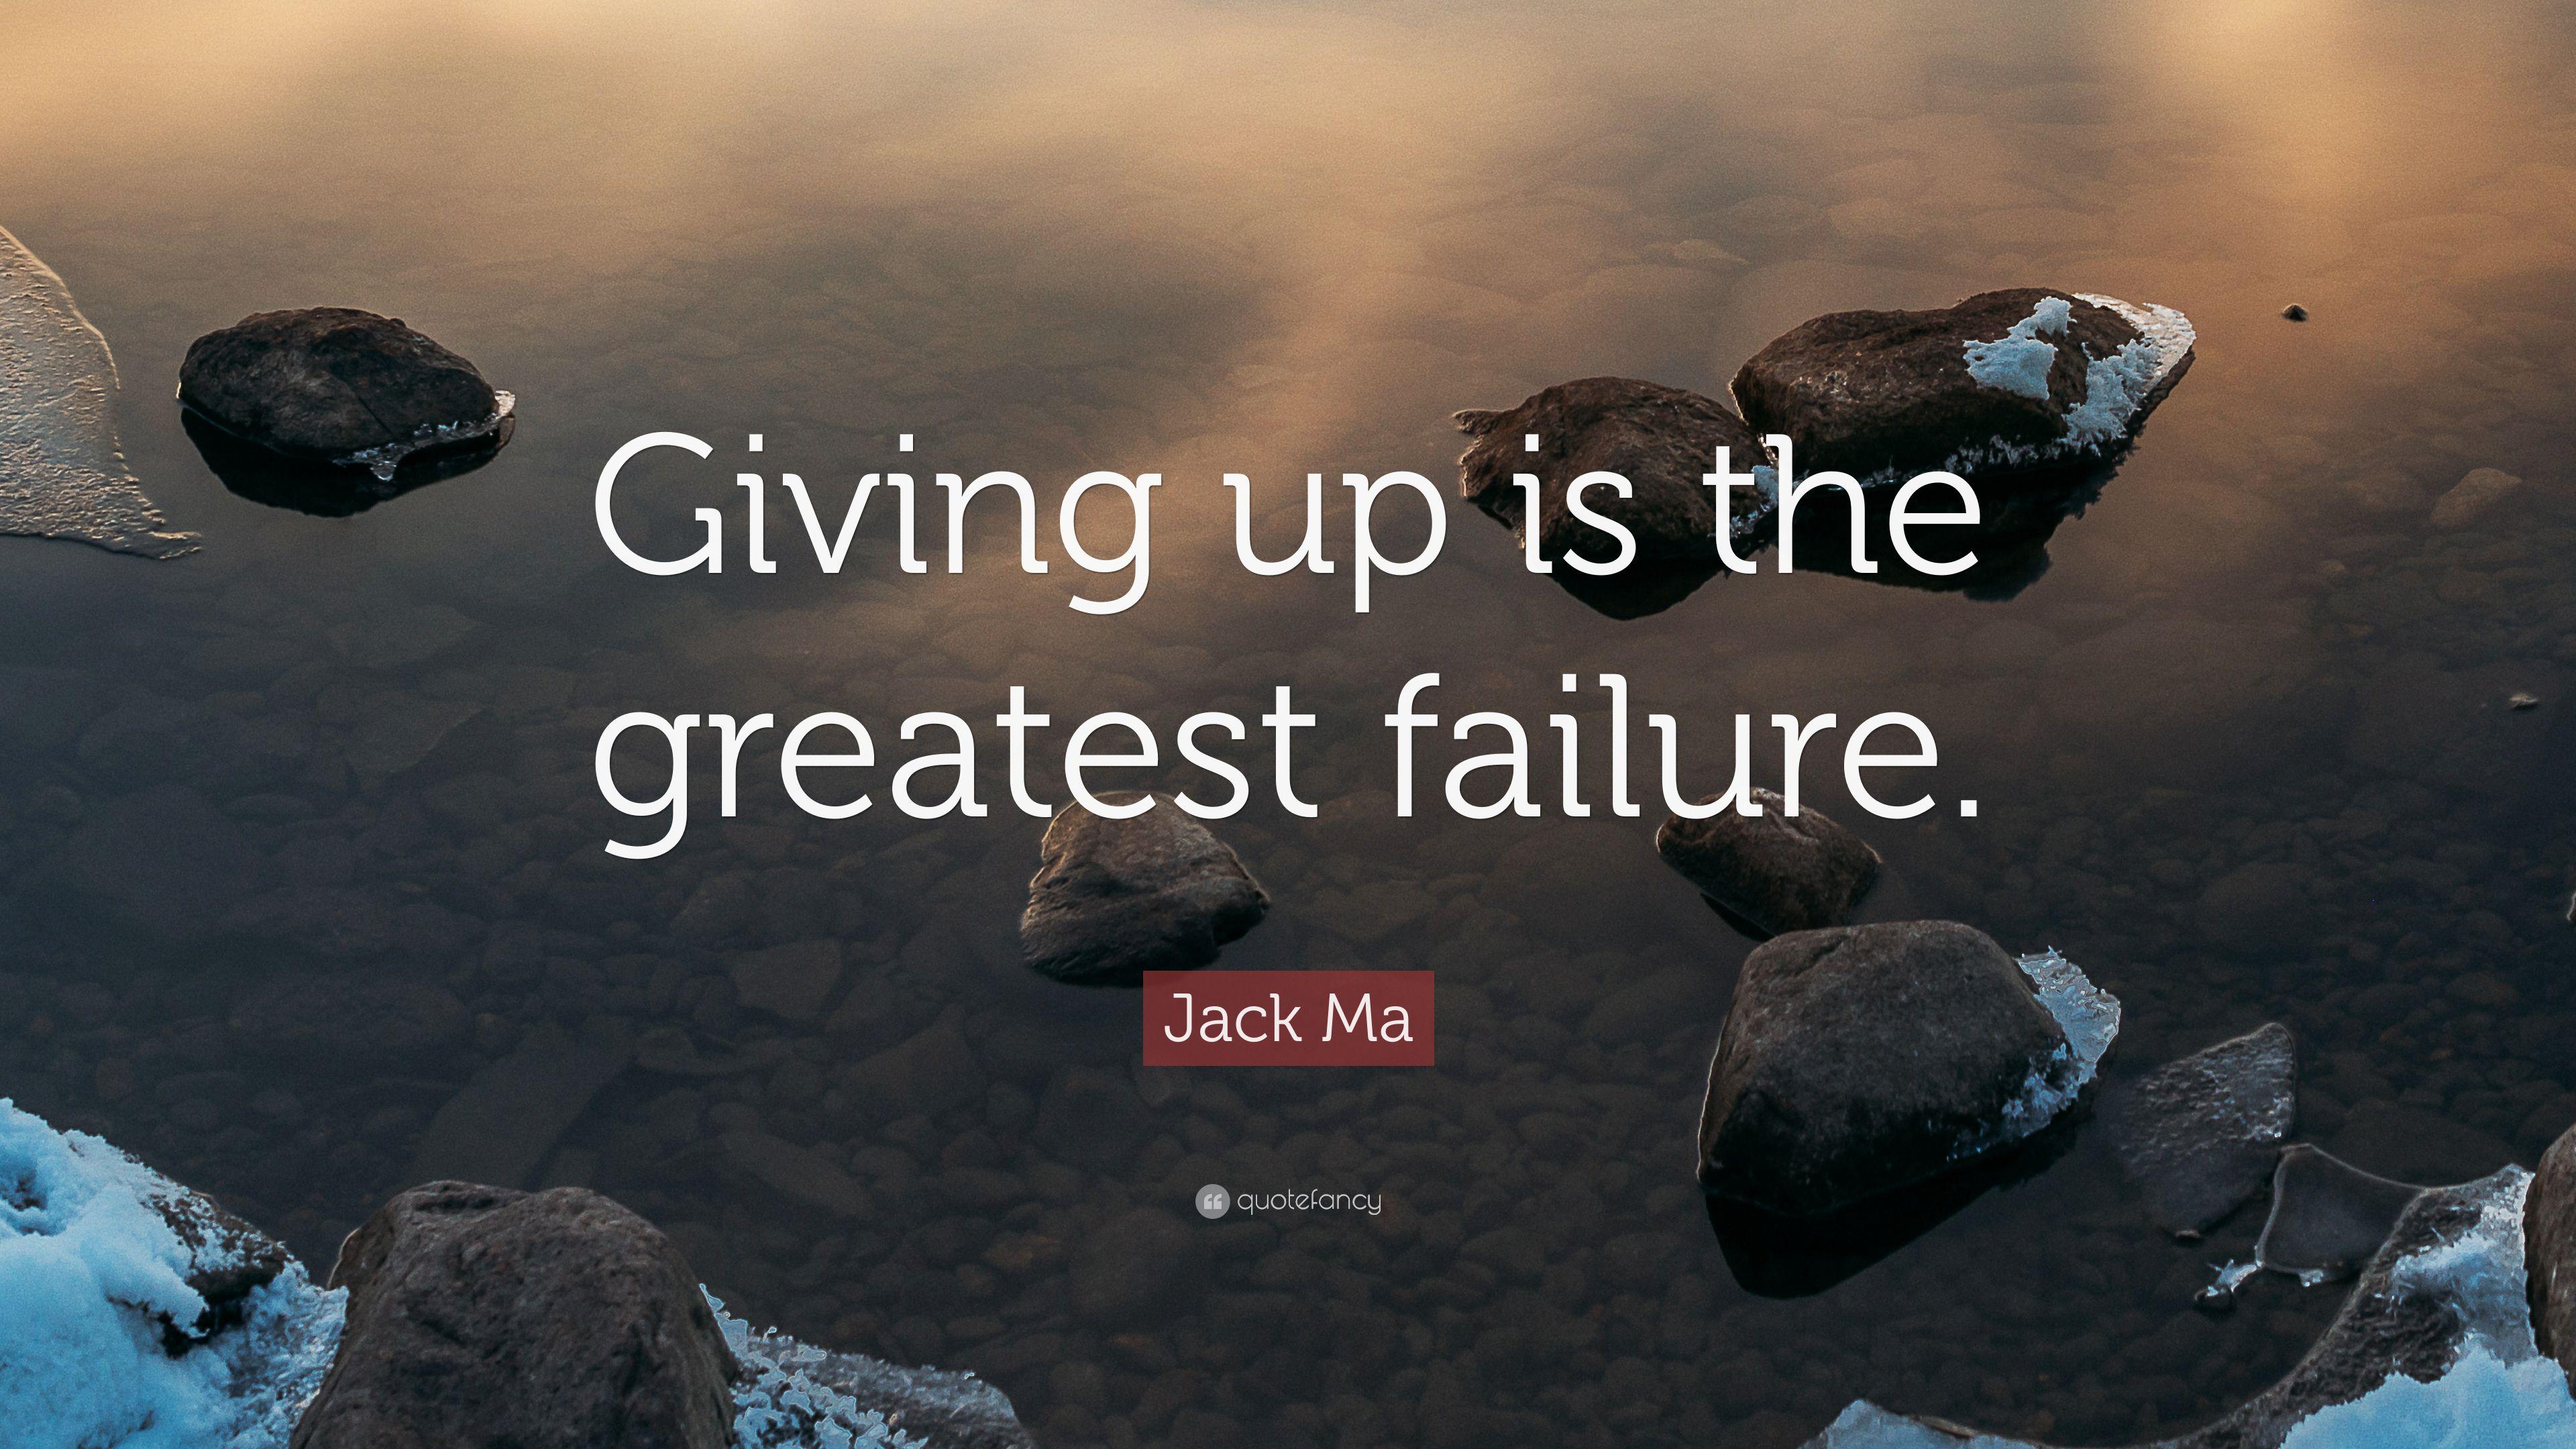 Jack Ma Quote: "Giving up is the greatest failure. 